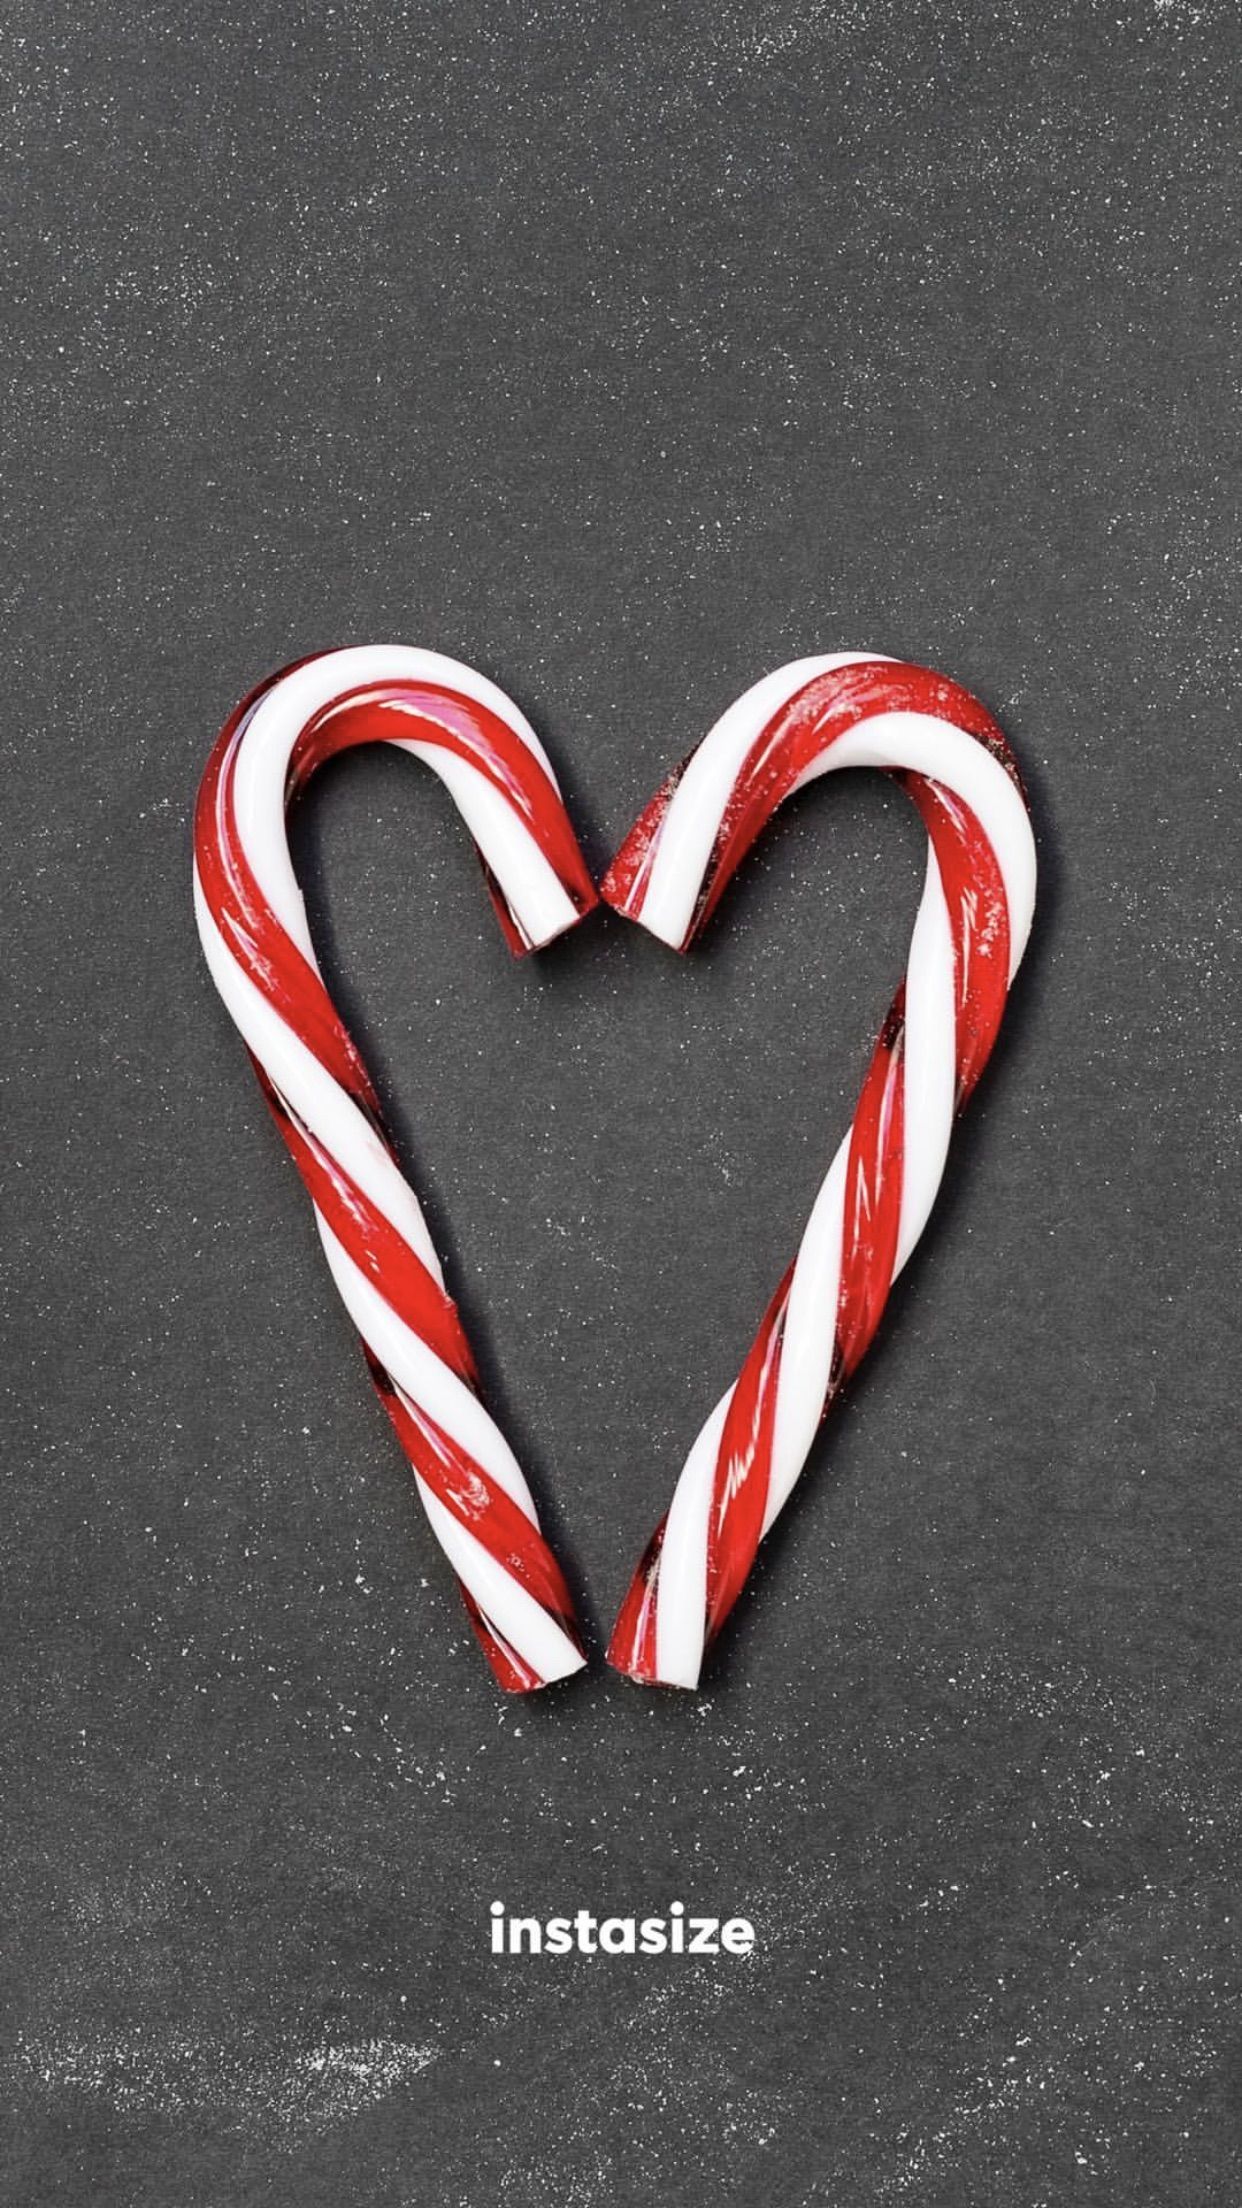 Two candy canes in the shape of a heart - Candy cane